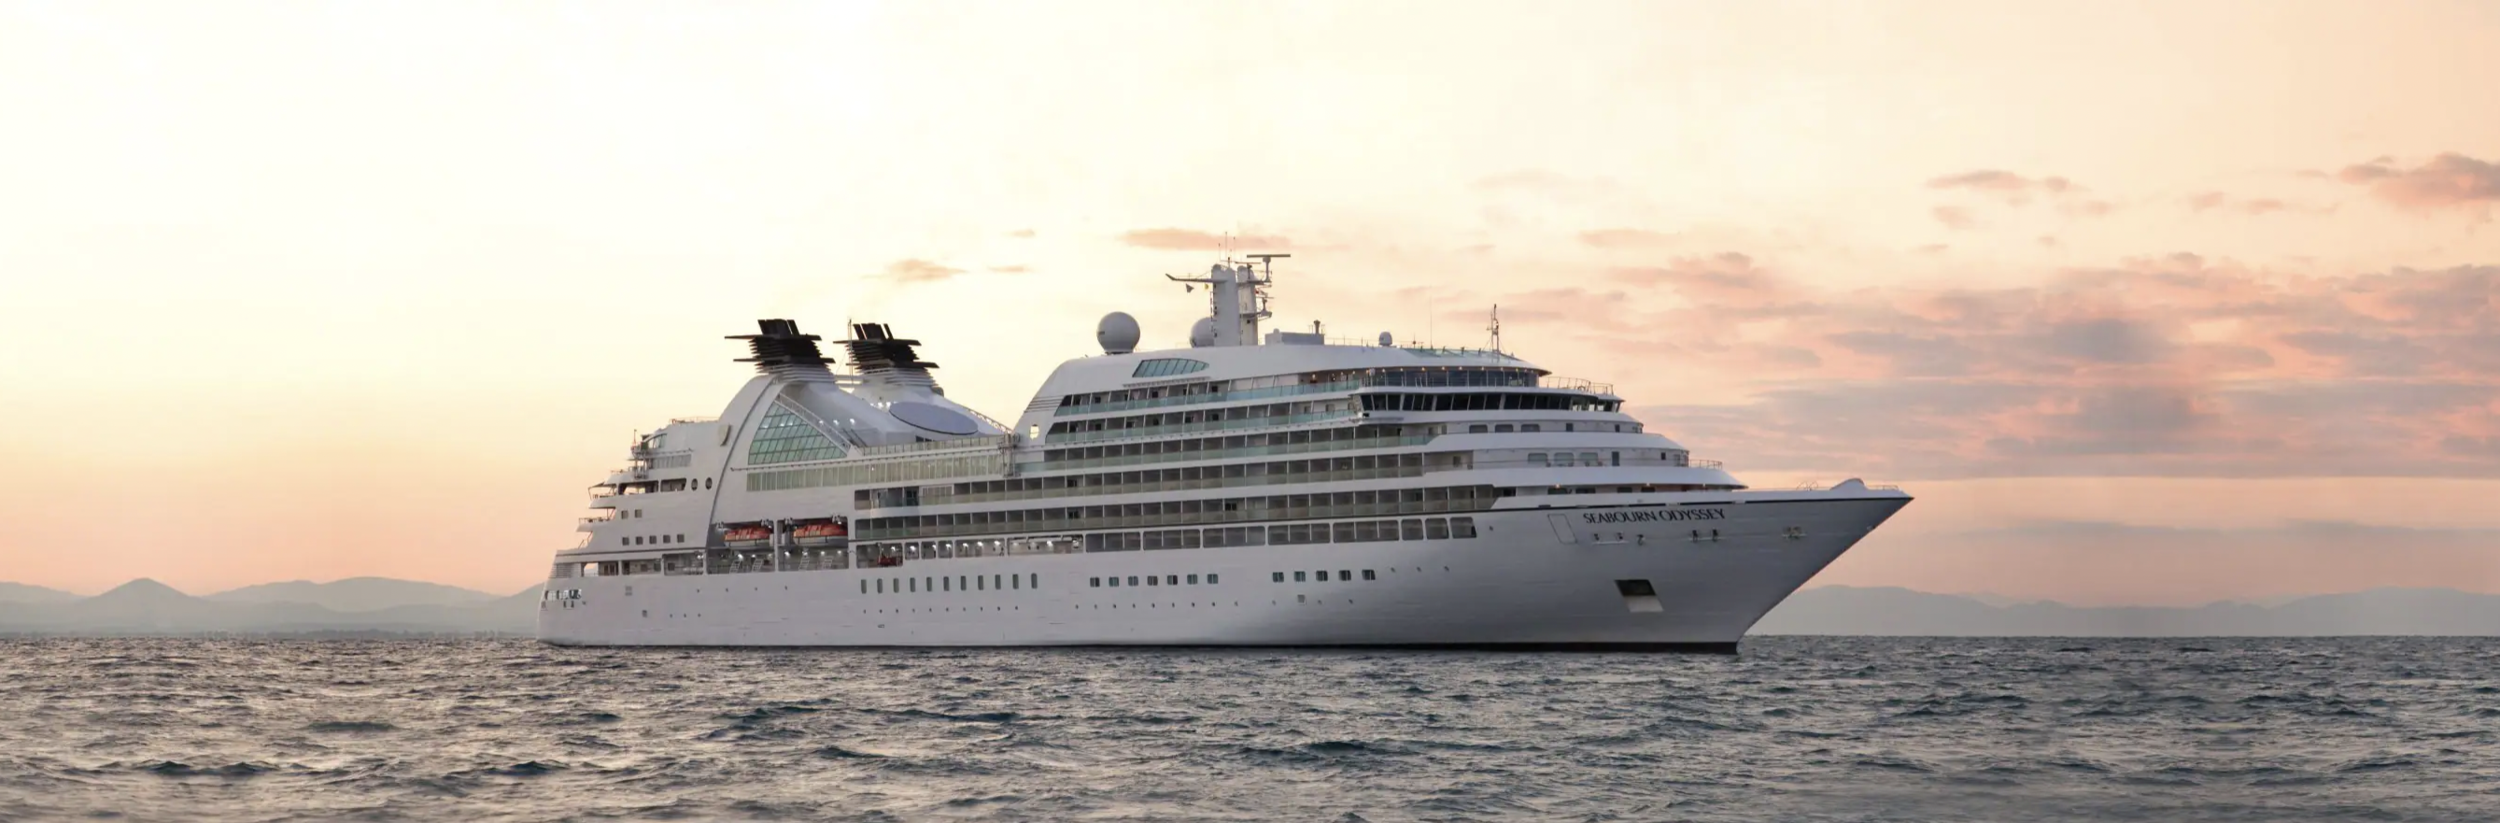 Seabourn Odyssey.png